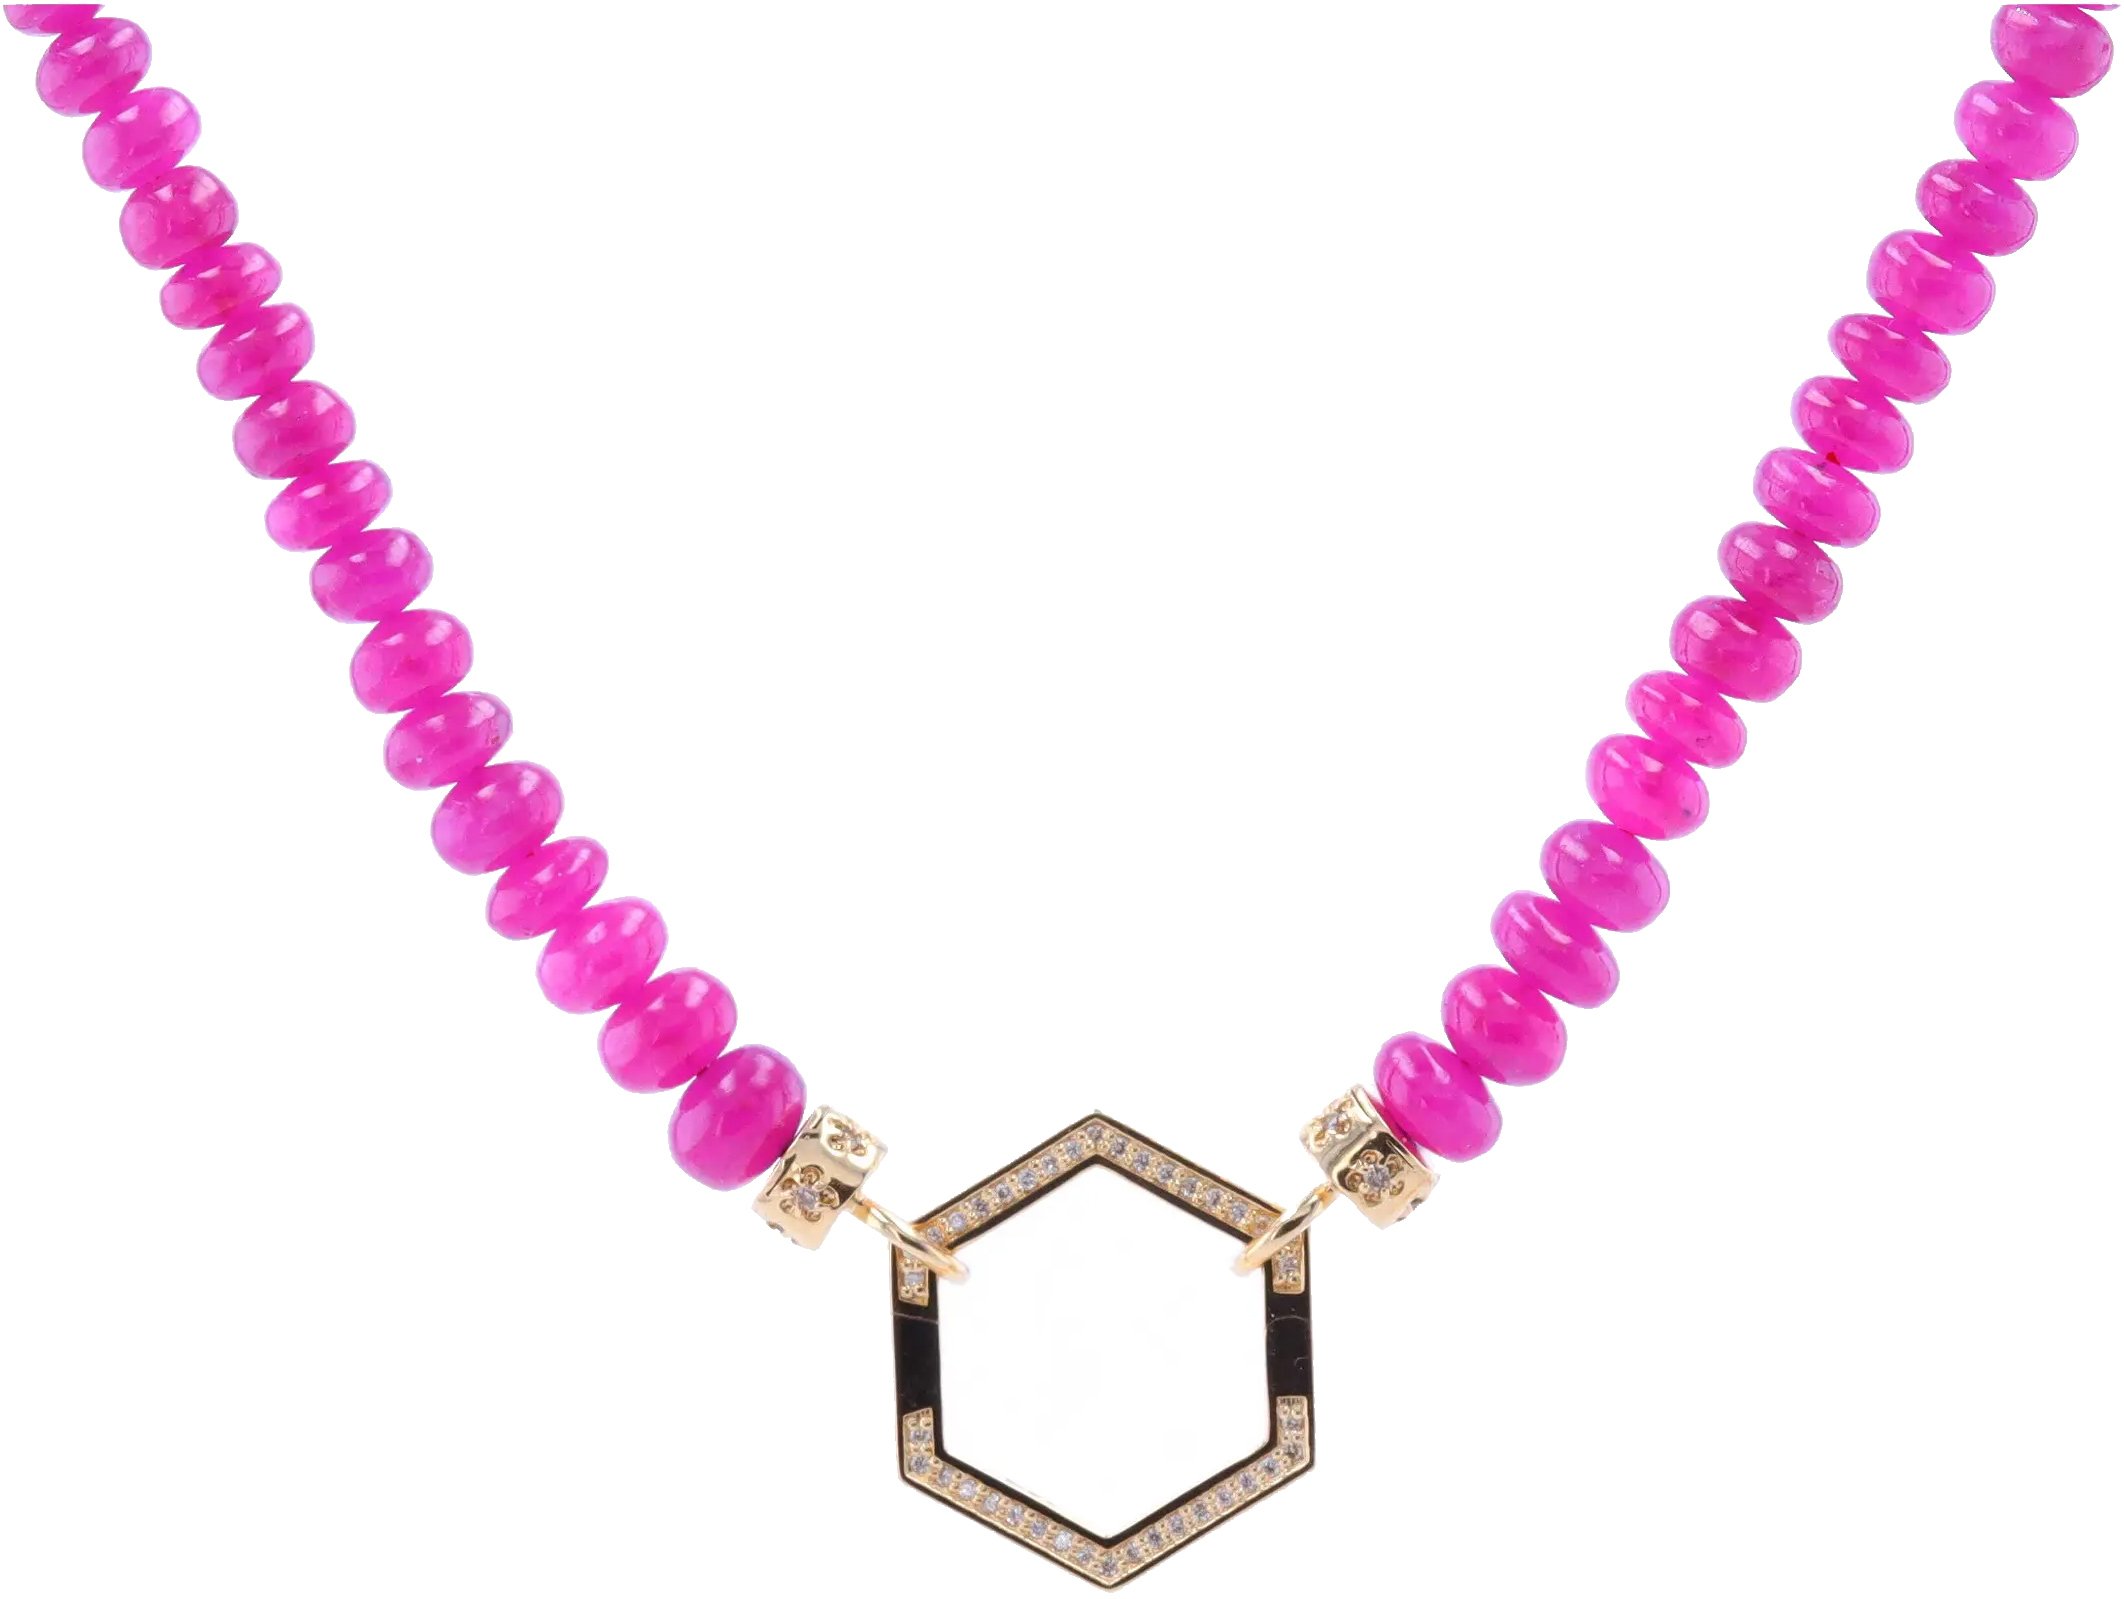 18-20" 4-5mm Hand Polished Pink Tourmaline Beaded Chain With 14k Gold Extension And Gold Caps and Hexagon